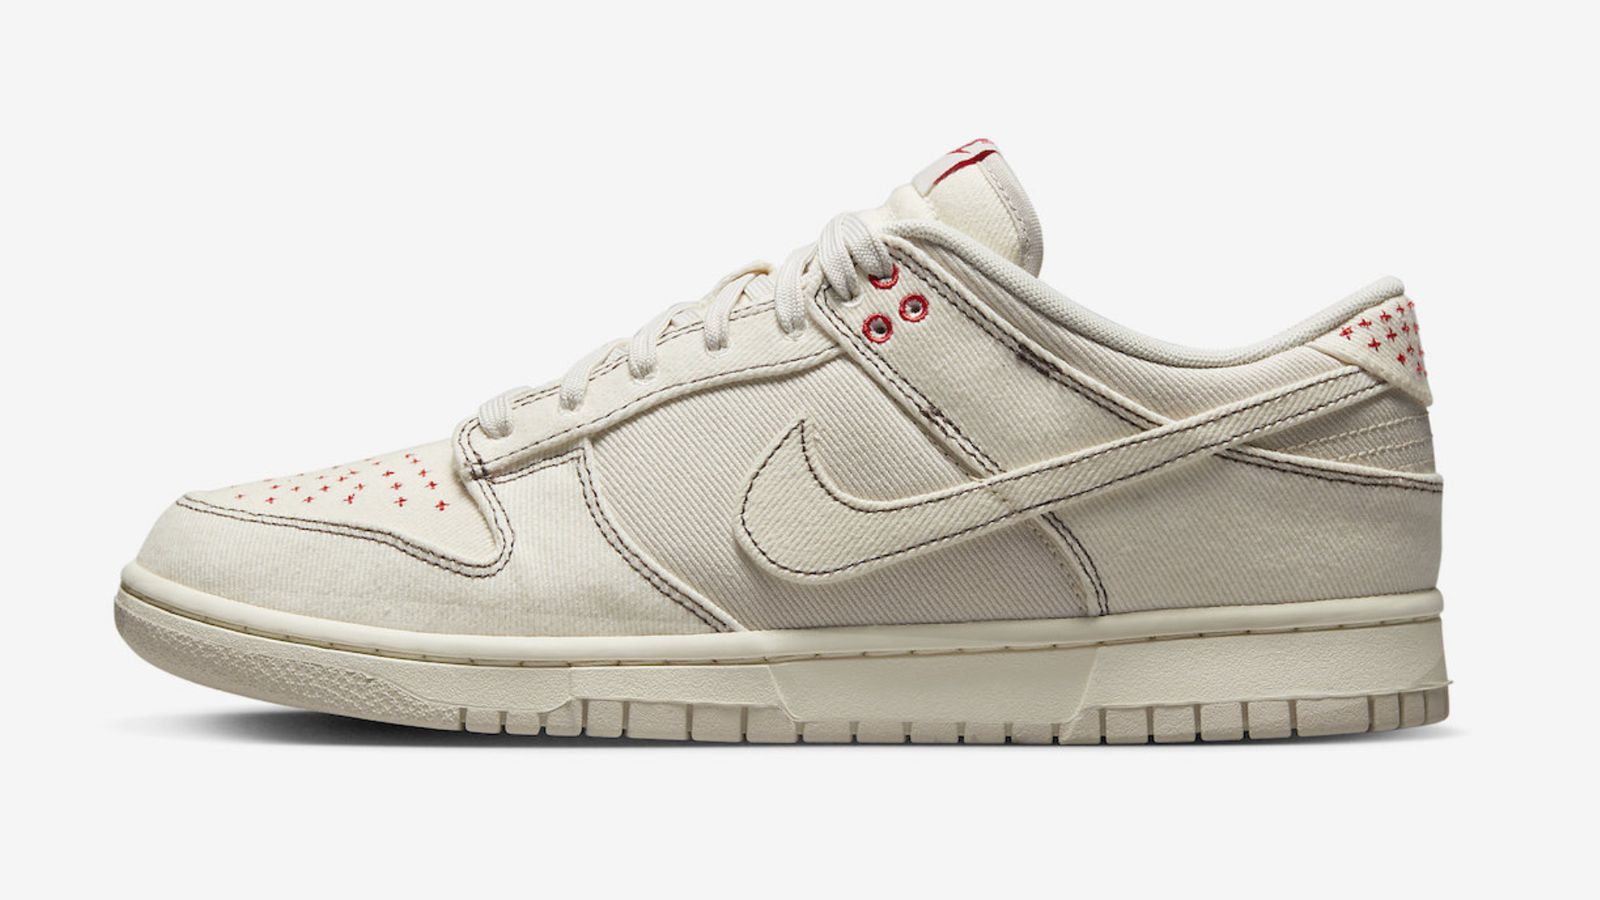 Nike Dunk Low "Light Orewood Brown" product image of a light brown and pale ivory sneaker featuring red accents.